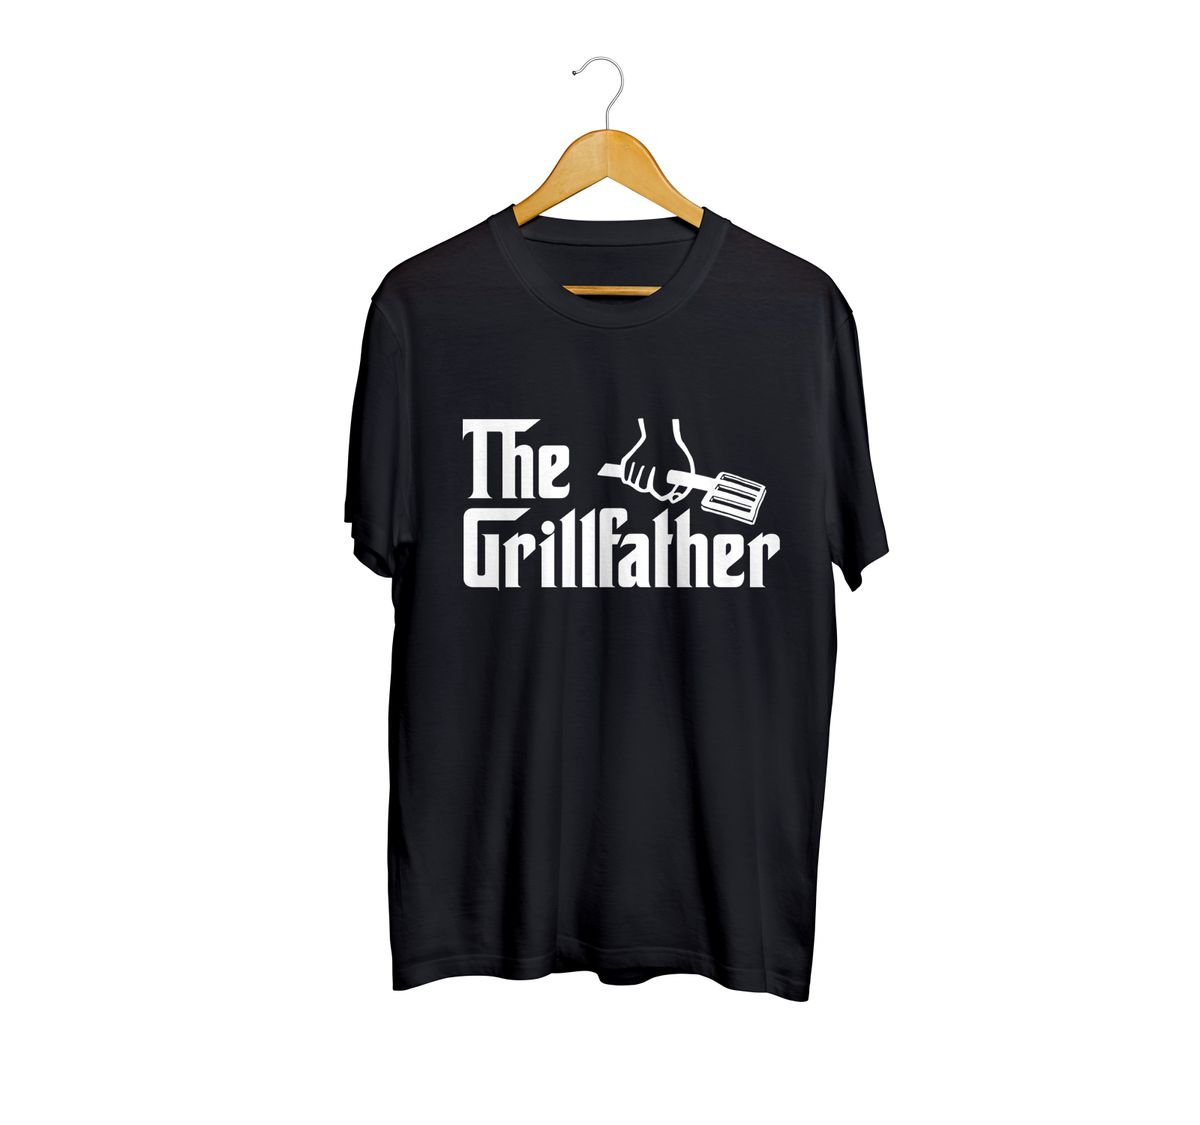 United BBQ Nation Black Grillfather T-Shirt image 1